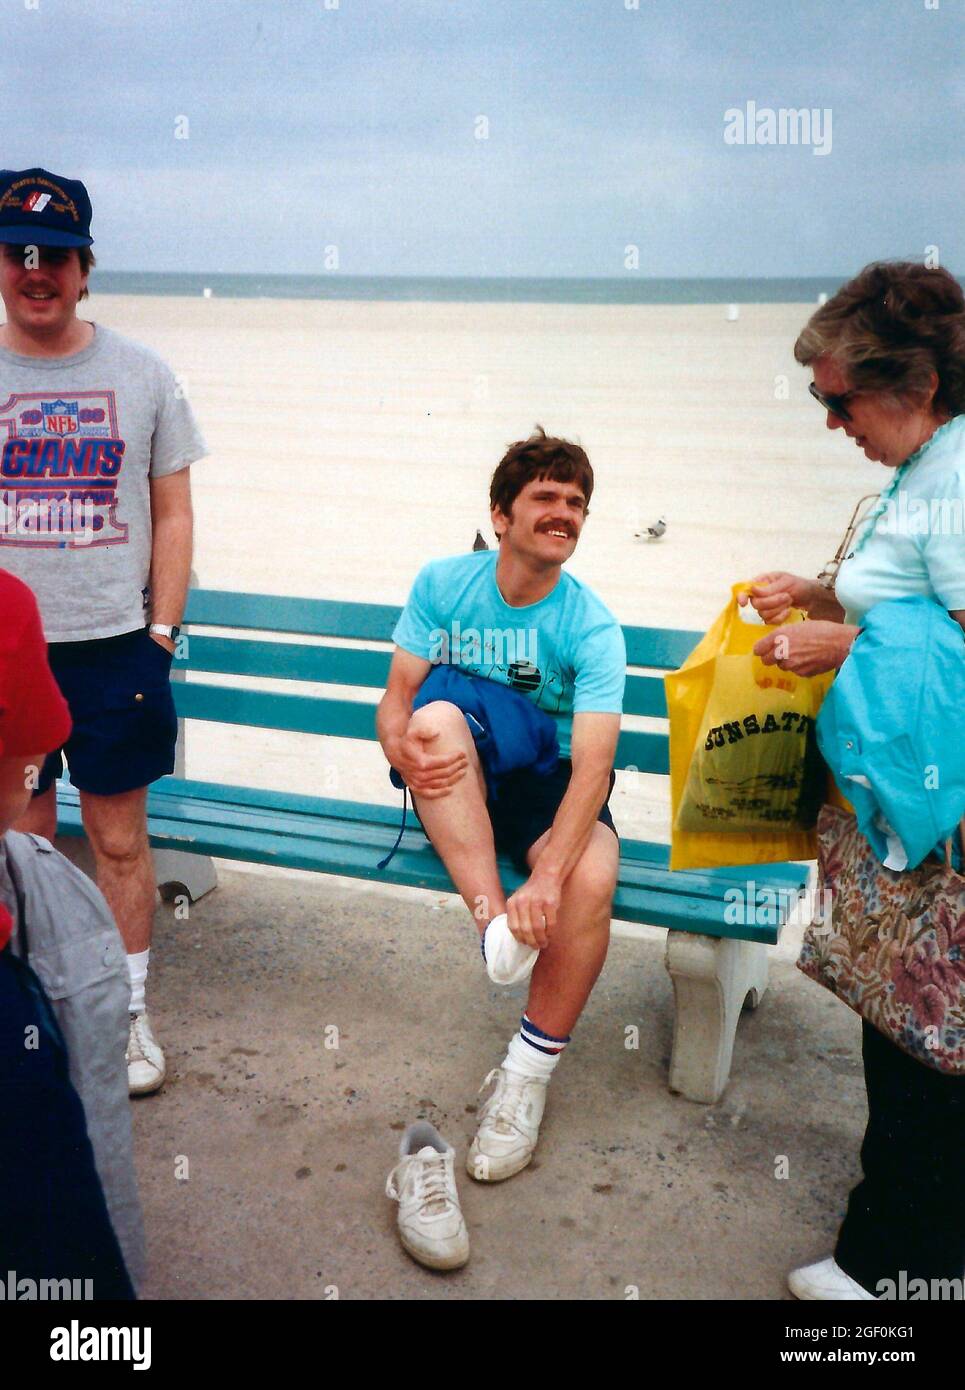 Man sitting on a bench and taking off his shoes while others stand around.  On the boardwalk in Ocean City, Maryland, circa 1988 Stock Photo